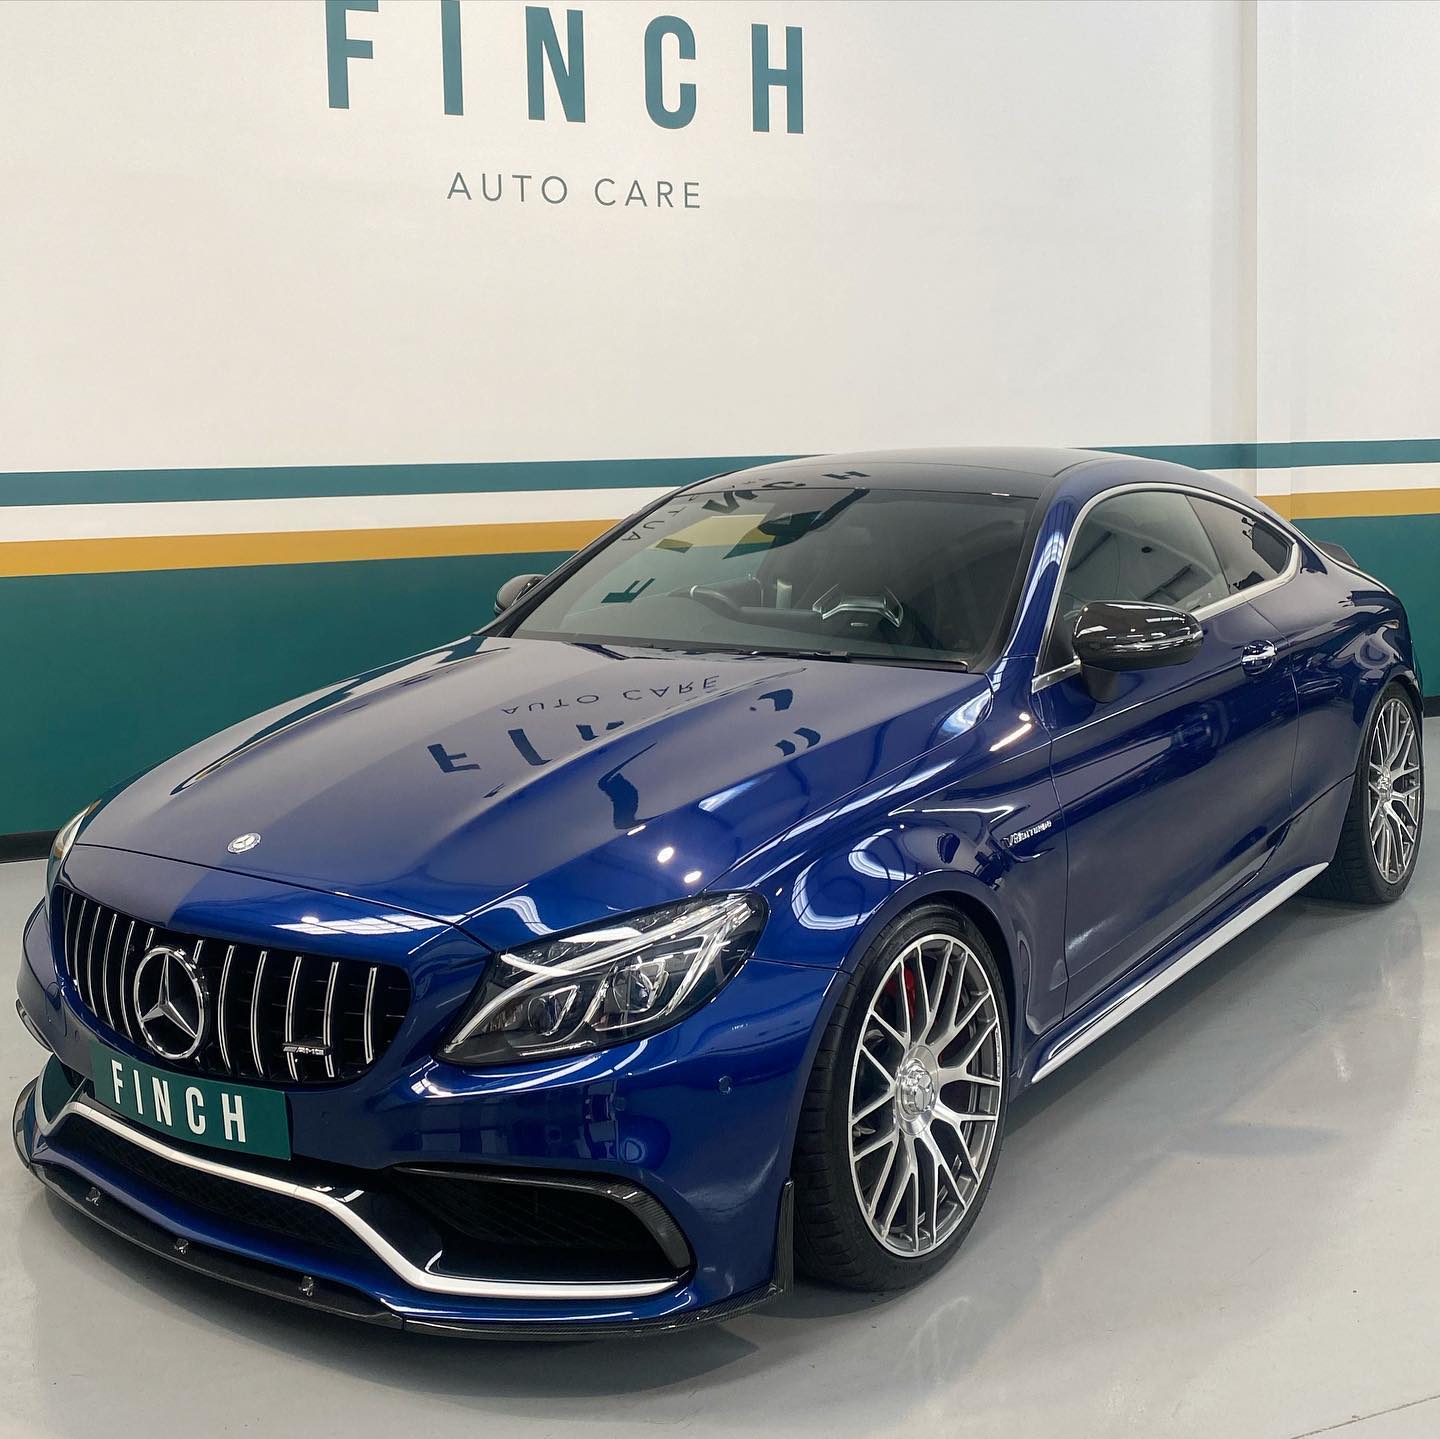 A blue mercedes-benz coupe parked inside a showroom with the sign "finch auto care" in the background.